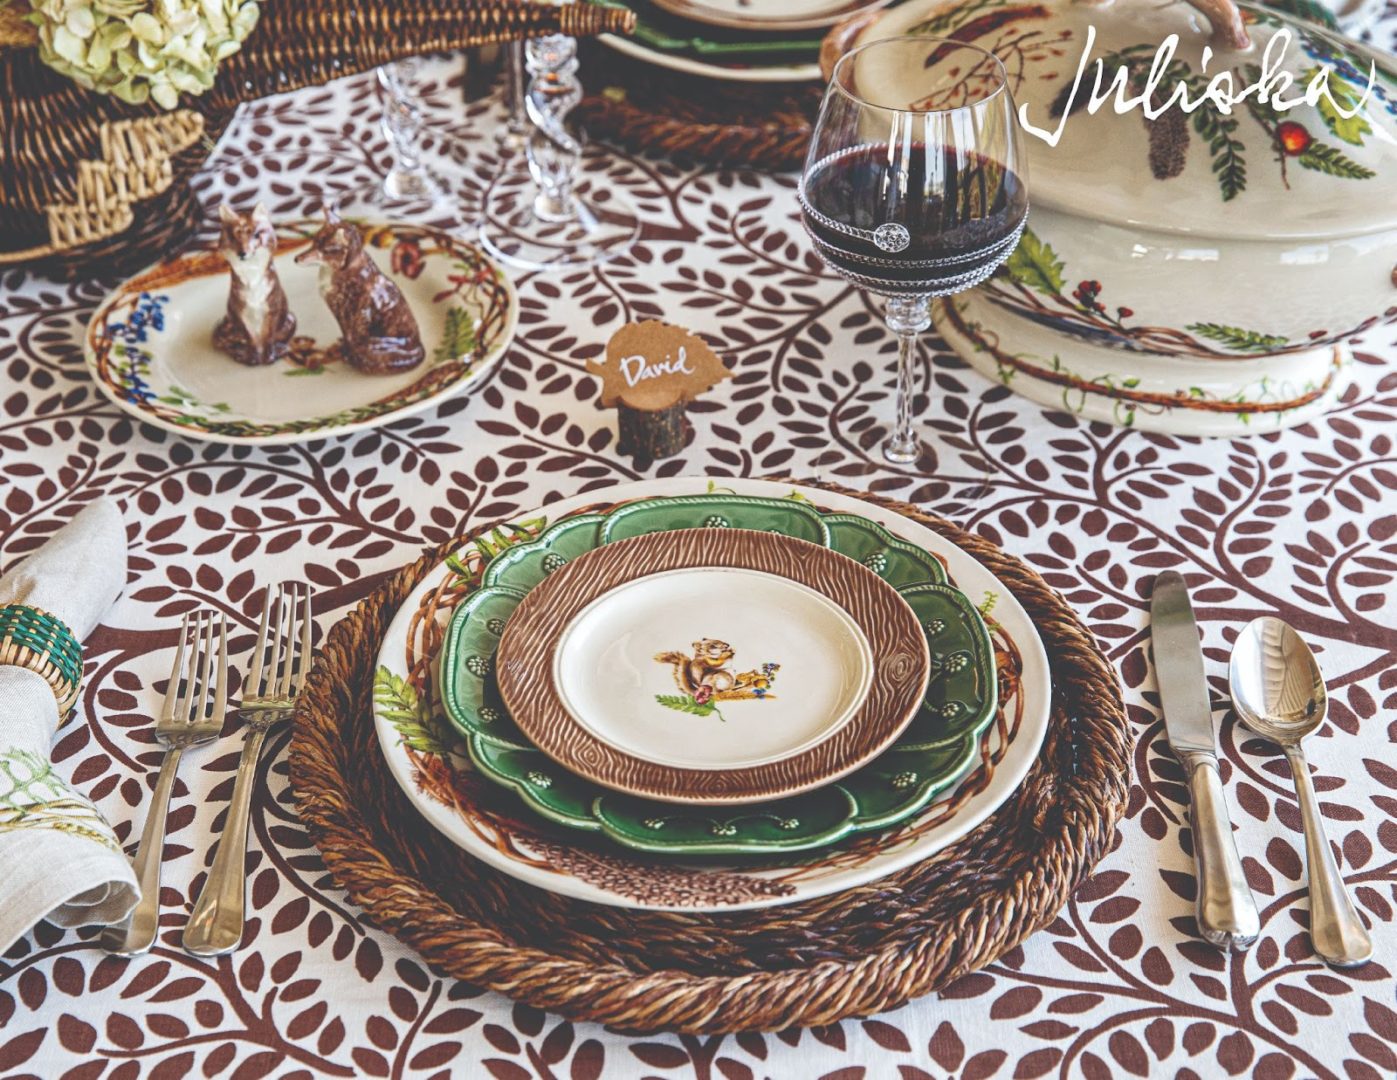 Juliska tablescape with rustic rope charger, Veronica Beard Jardins Du Monde, and Forest Walk patterns.